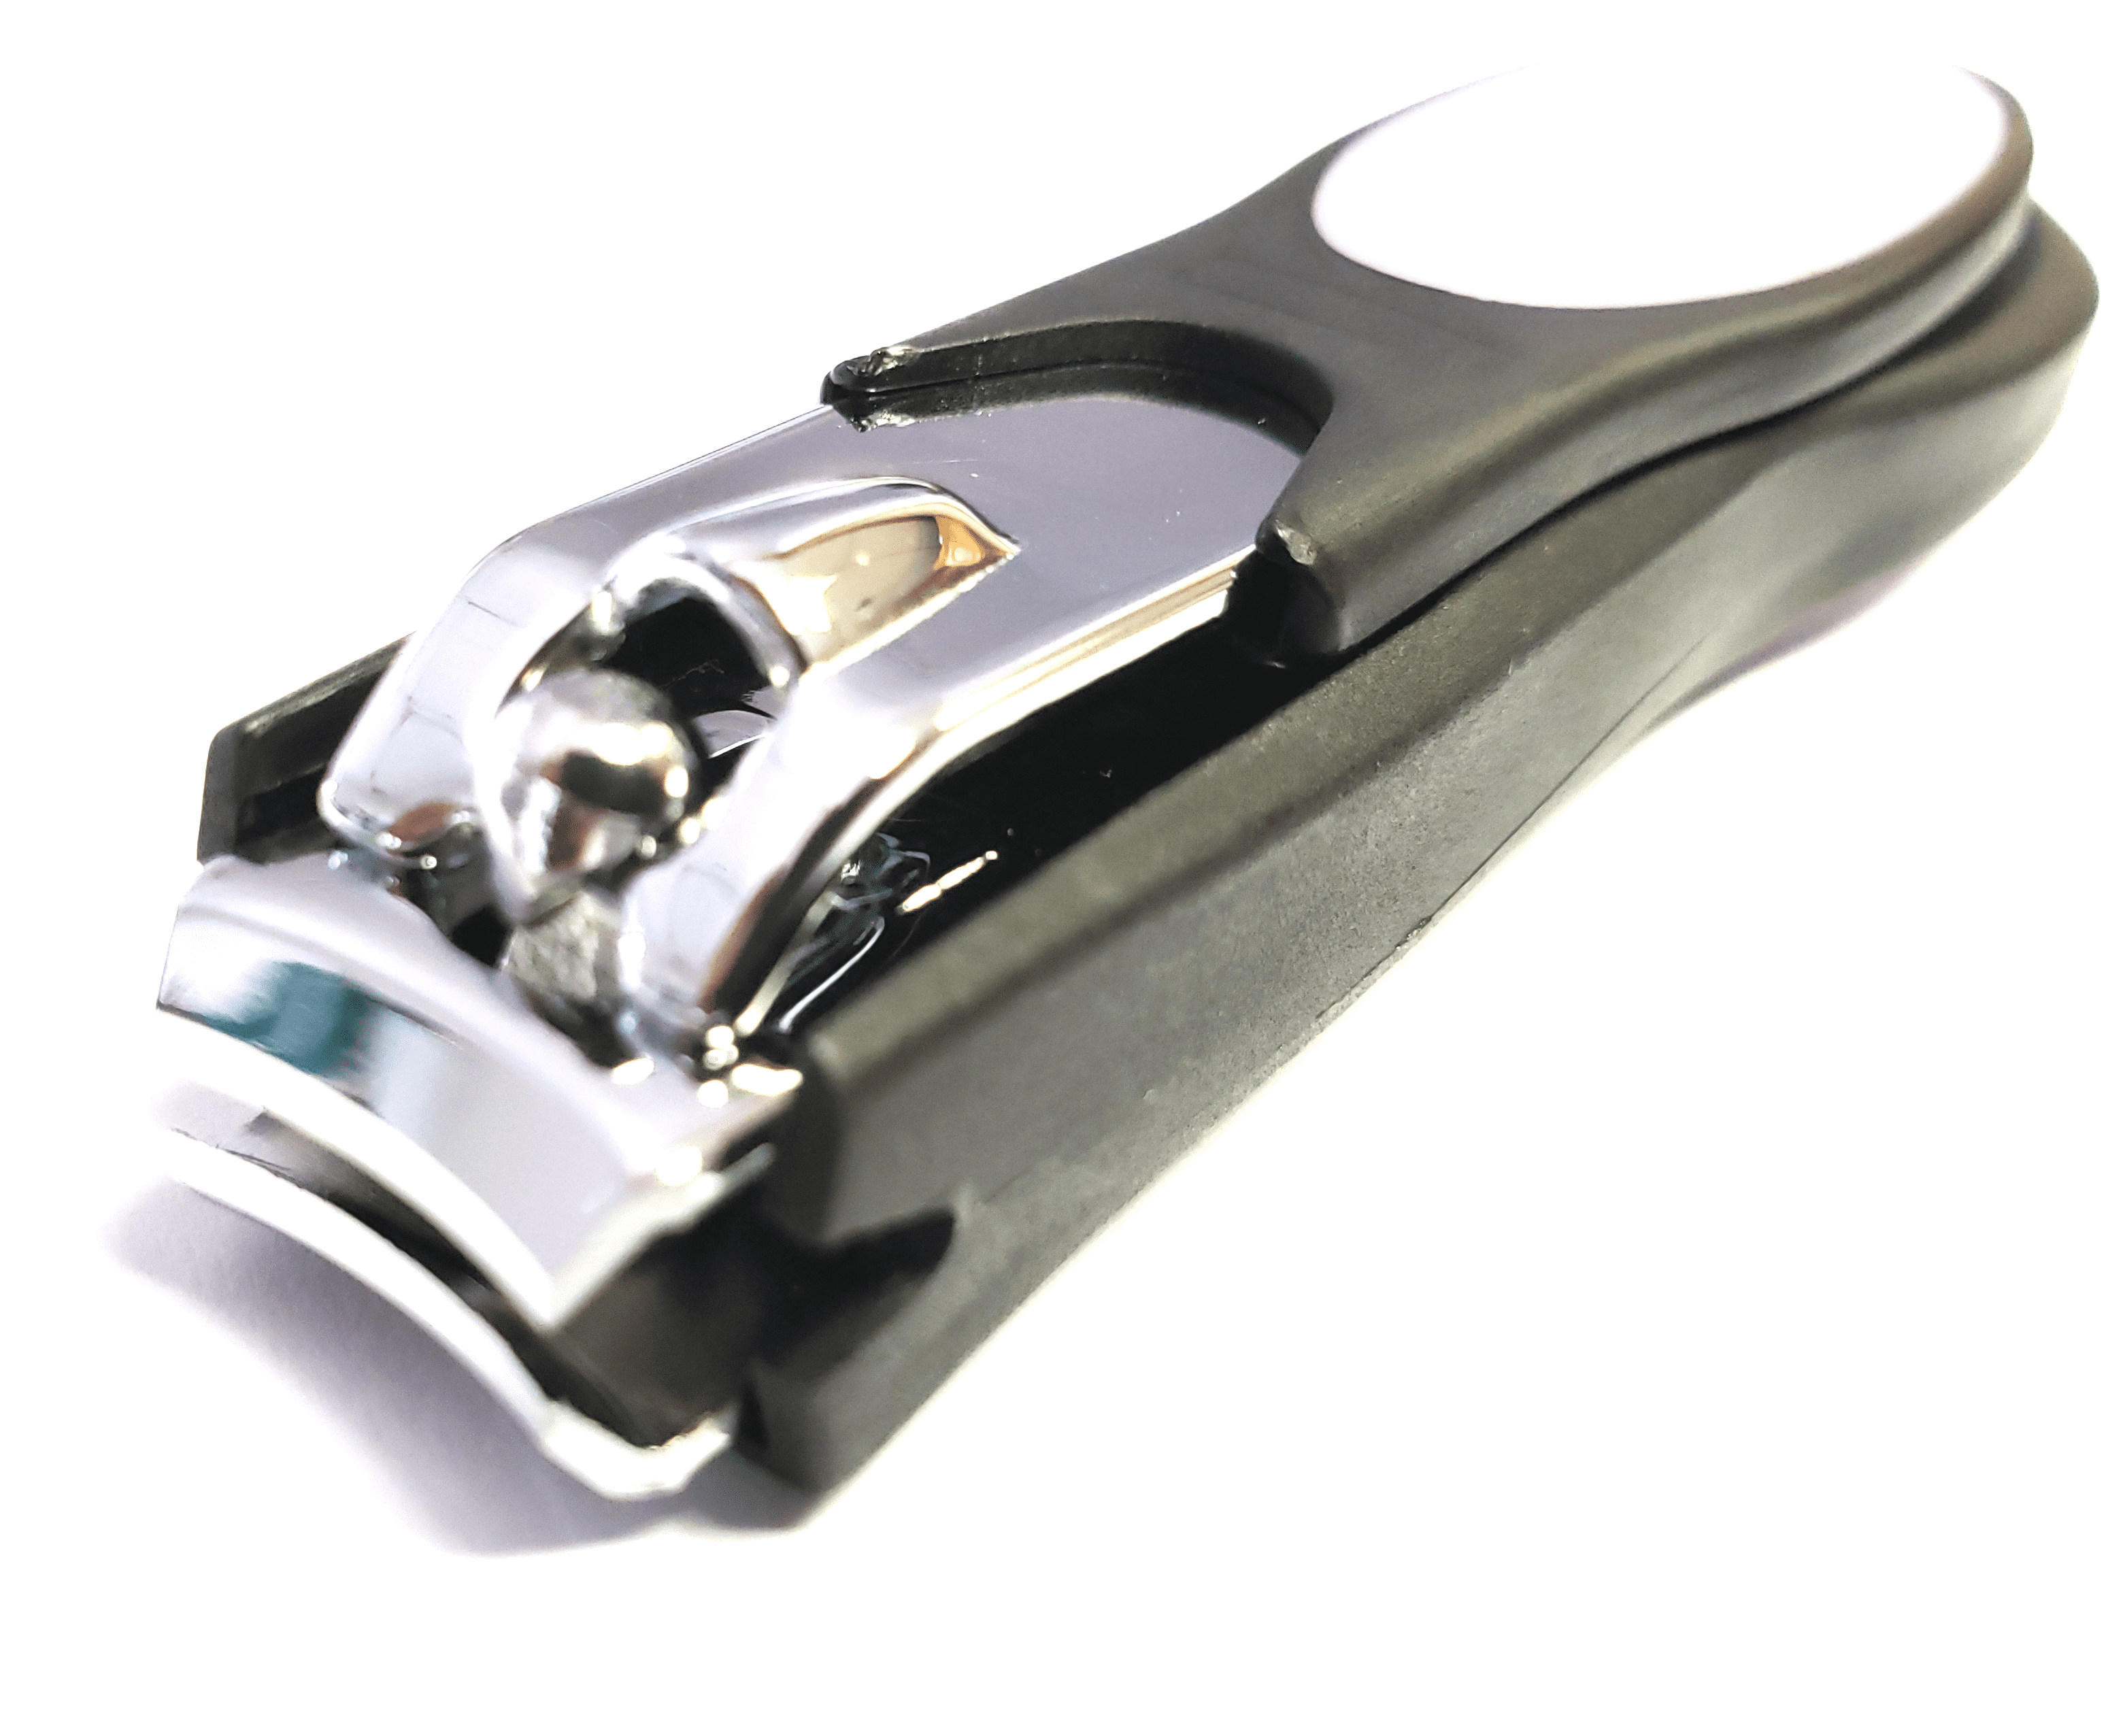 Cuticle Clipper By Premax. Made In Italy By Premax Corner Angled Nail  Clippers | eBay